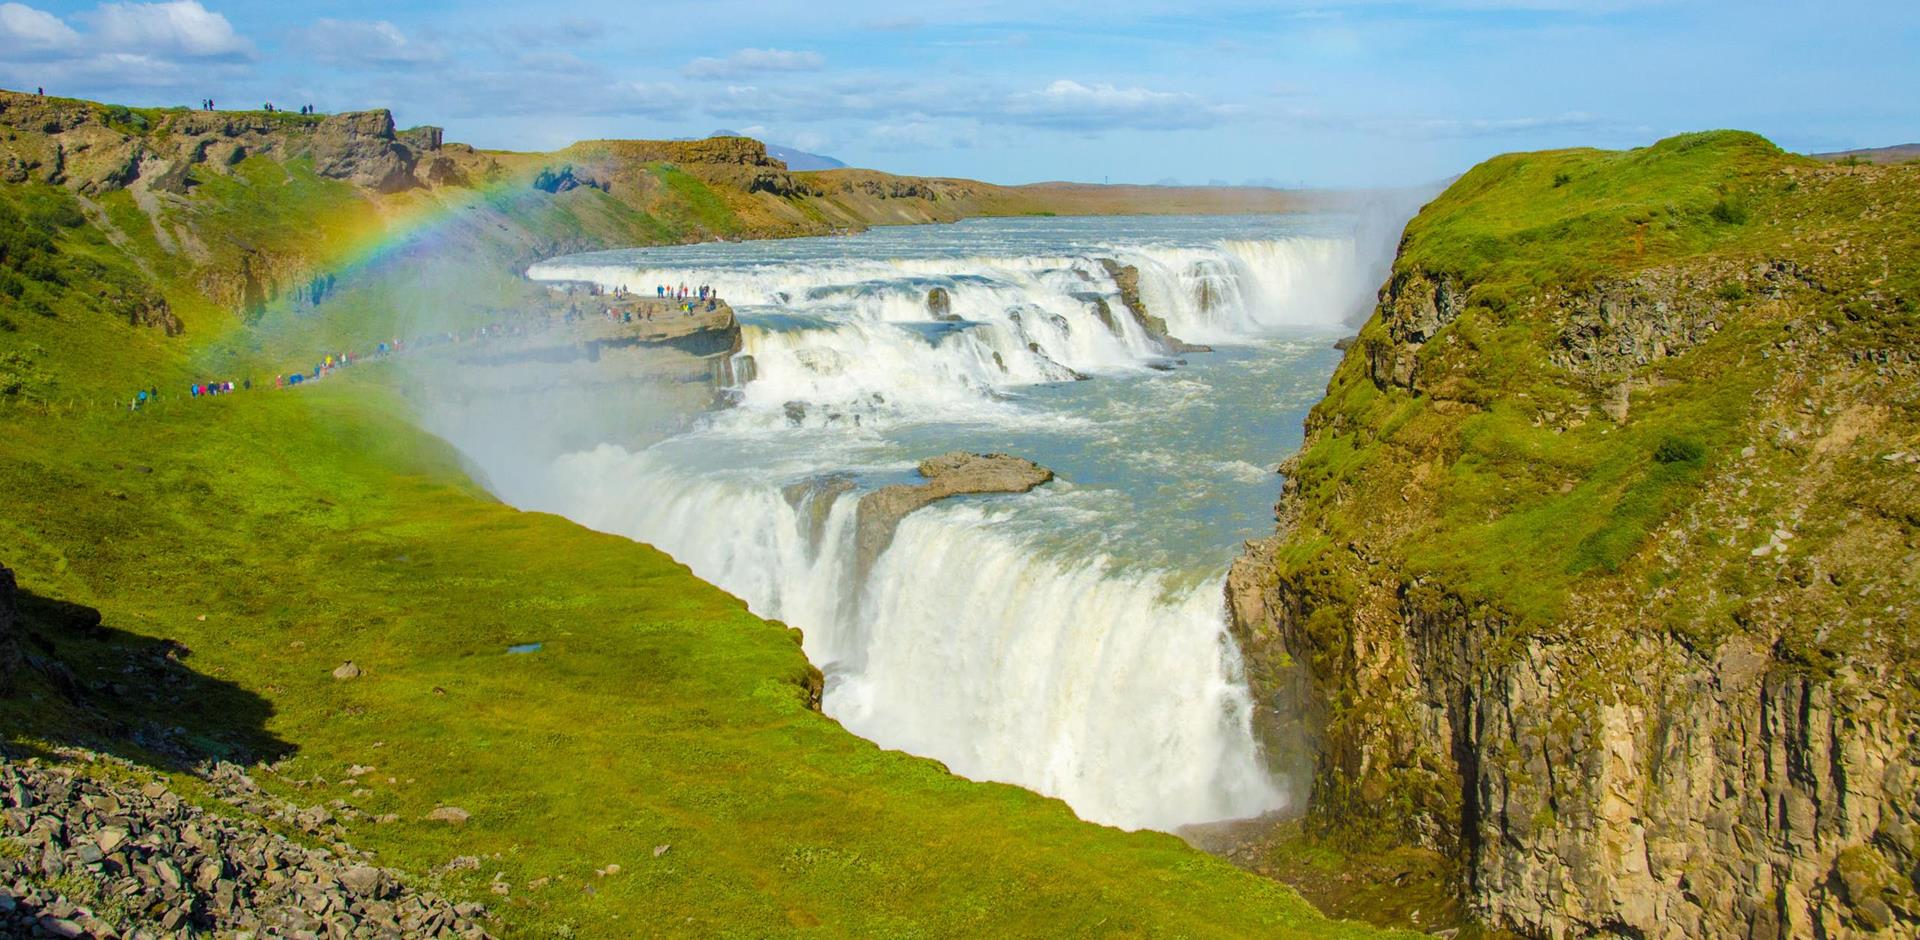 Eight reasons why we find Iceland fascinating